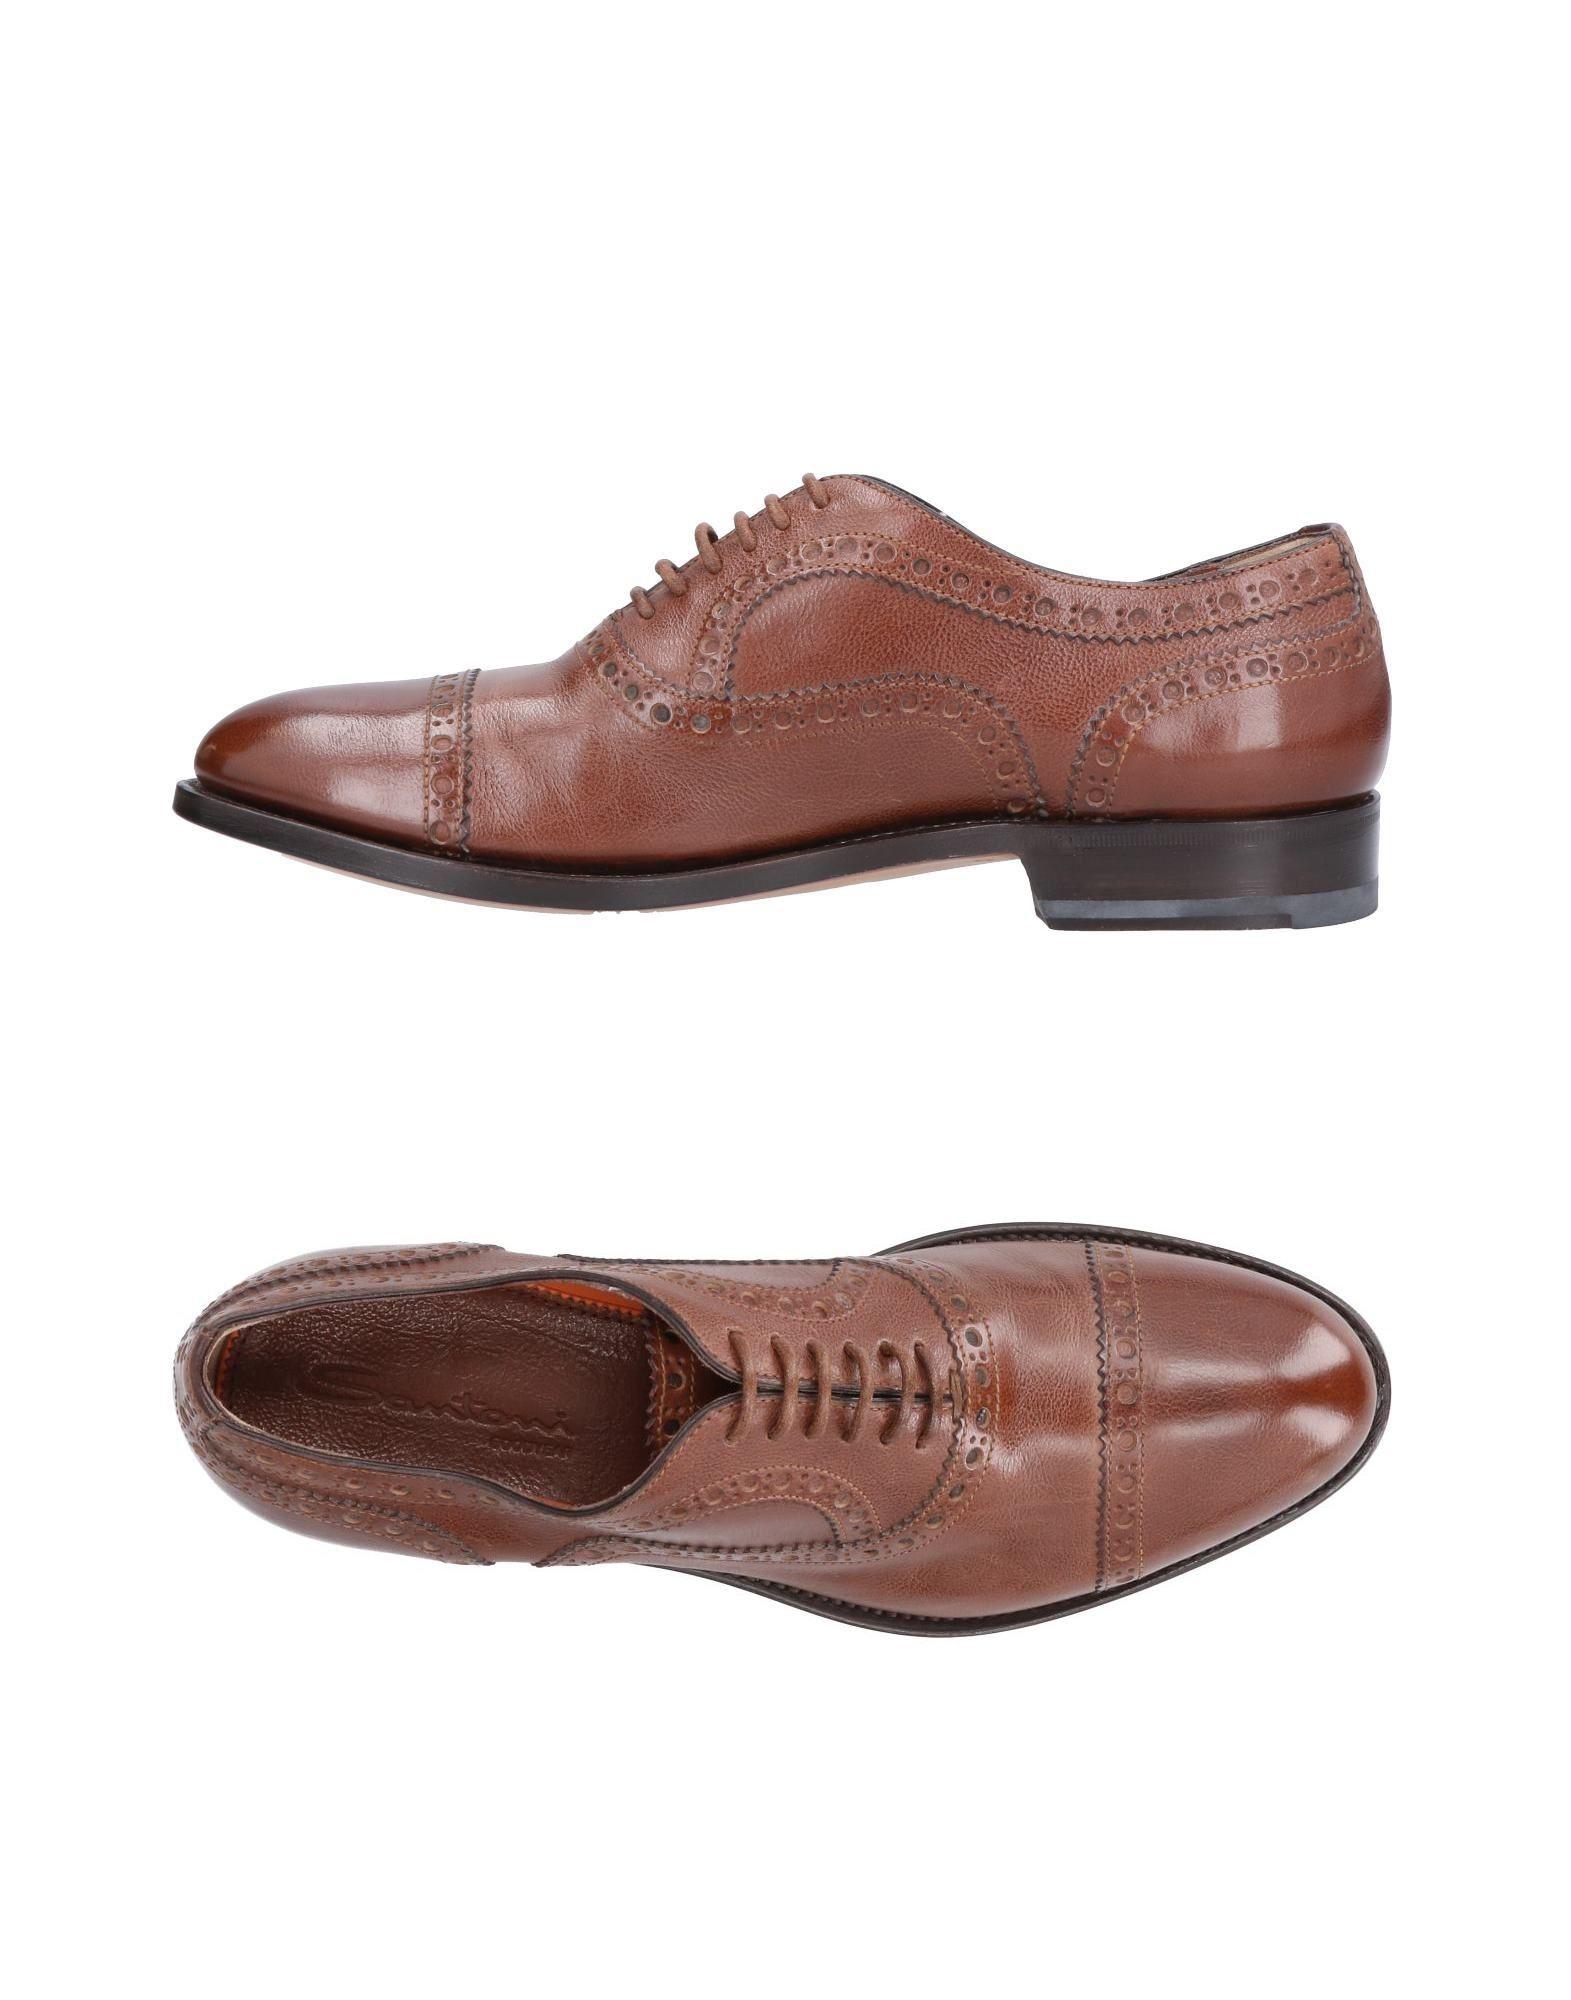 Santoni Leather Lace-up Shoe in Tan (Brown) for Men - Lyst